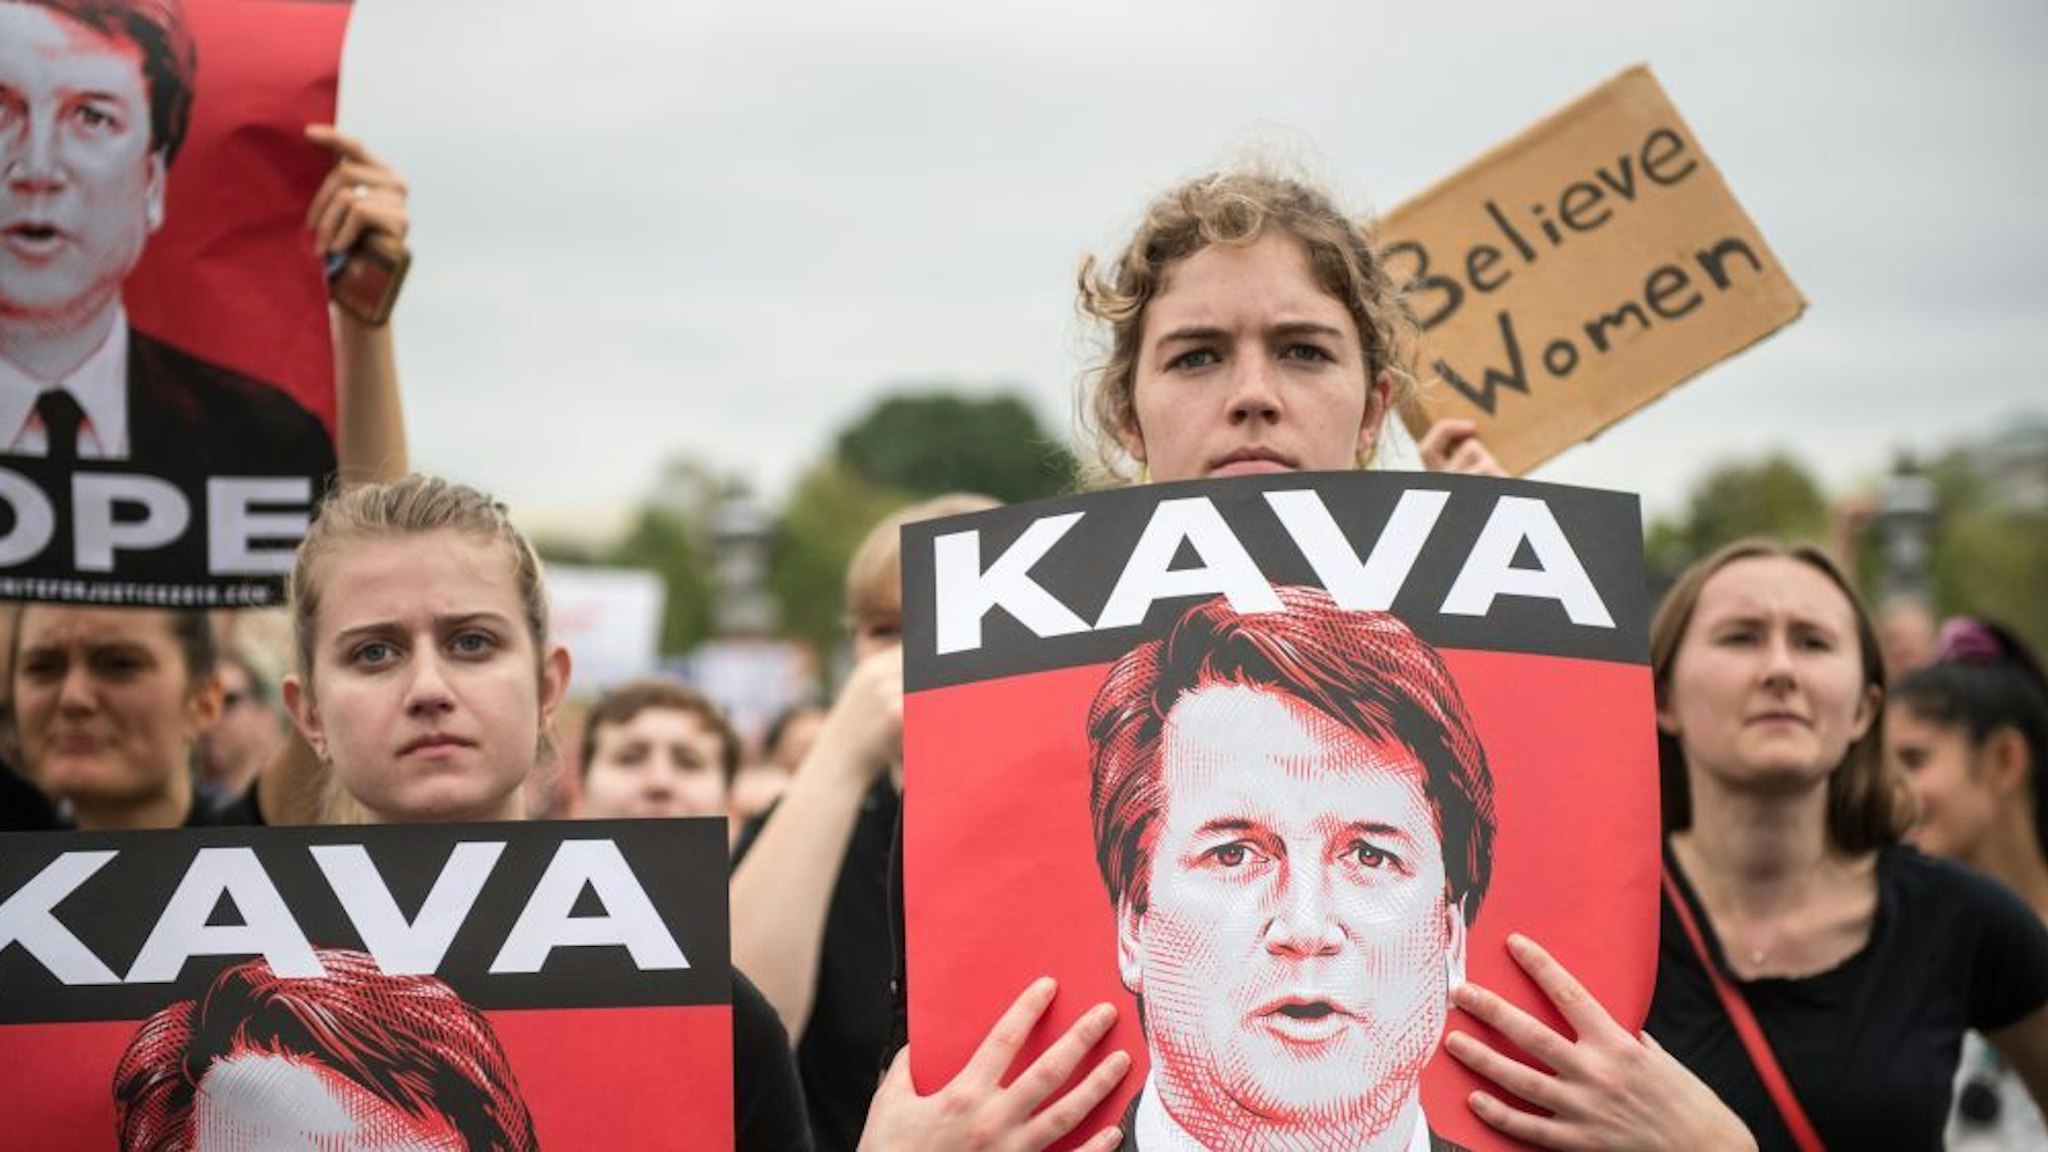 Women demonstrators protest against the appointment of Supreme Court nominee Brett Kavanaugh at the US Capitol in Washington DC, on October 6, 2018. - The US Senate confirmed conservative judge Kavanaugh as the next Supreme Court justice on October 6, offering US President Donald Trump a big political win and tilting the nation's high court decidedly to the right. (Photo by ROBERTO SCHMIDT / AFP)